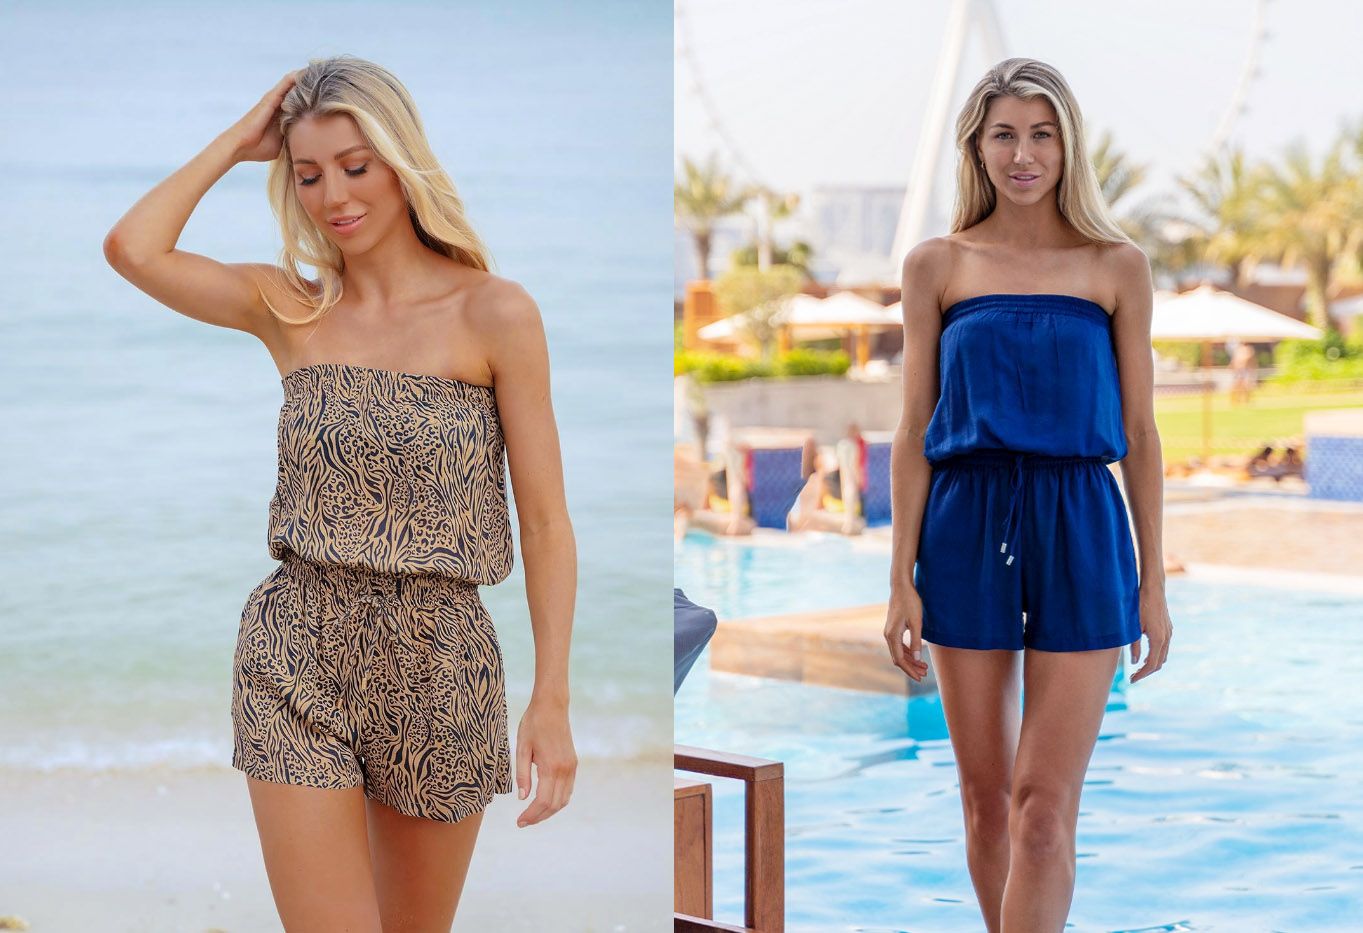 Outfits that would look great at brunch and the beach|Caha Capo